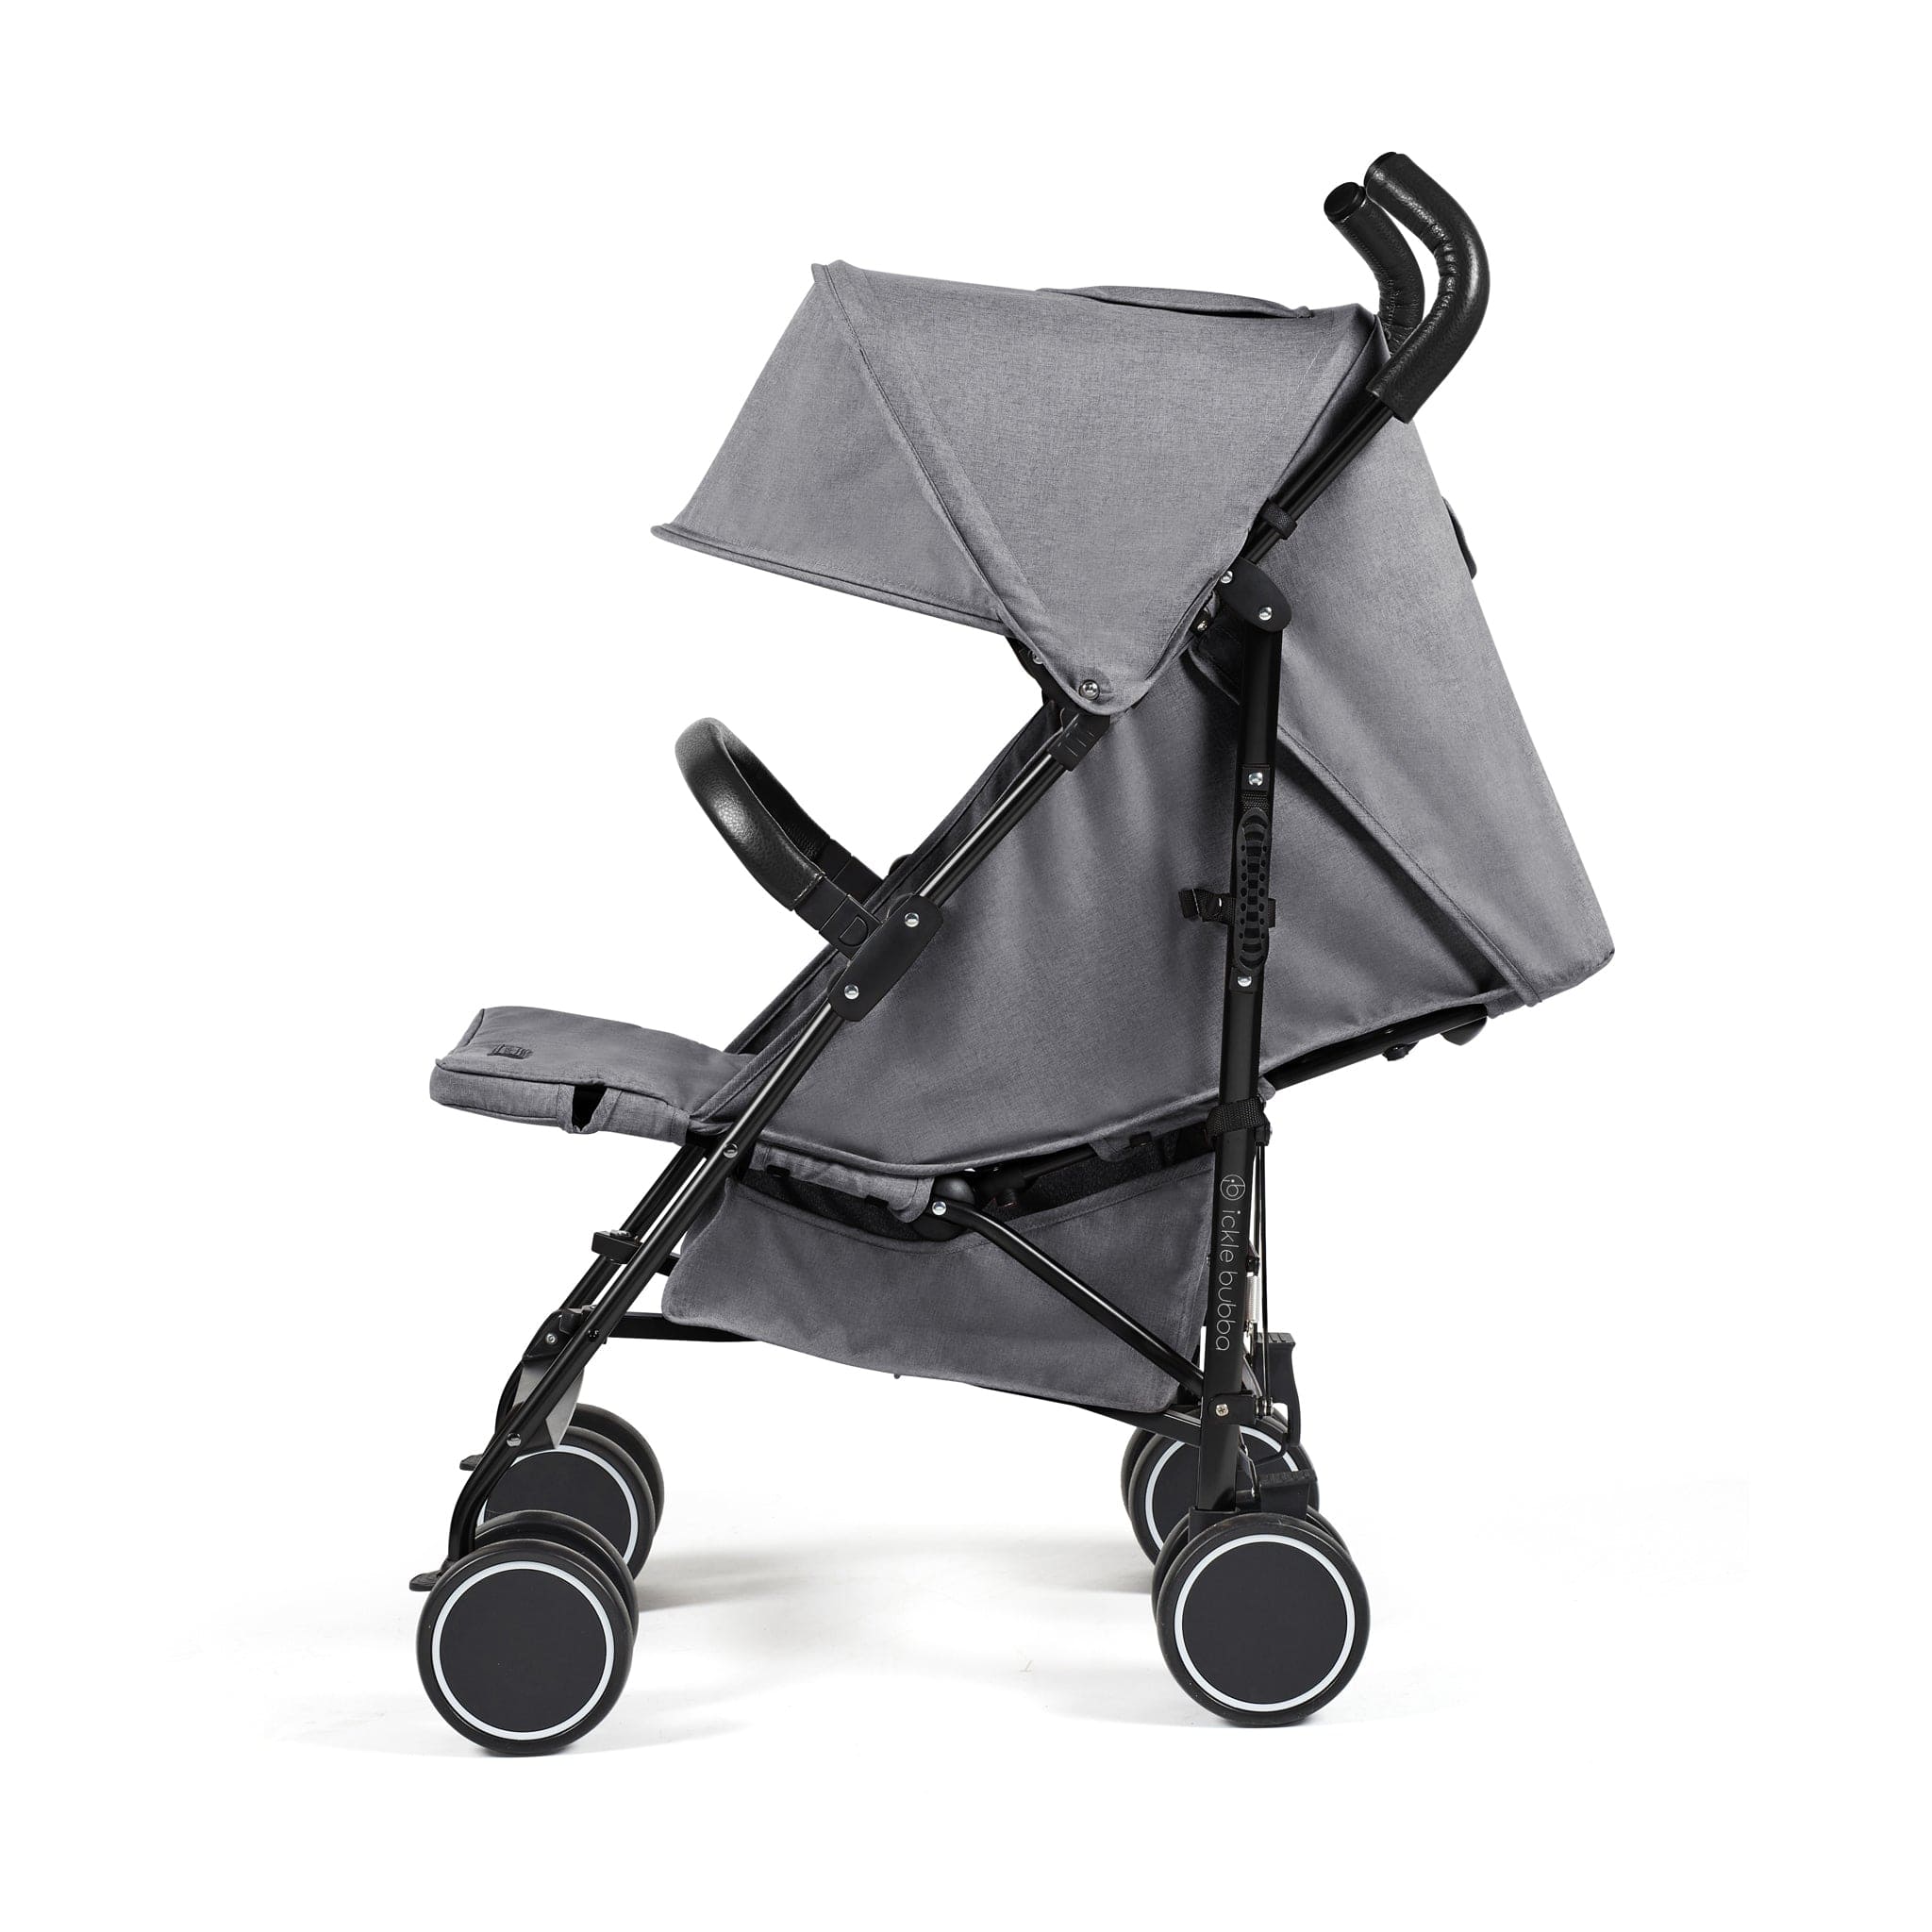 Ickle Bubba baby pushchairs Ickle Bubba Discovery Max Pushchair Graphite Grey/Matt Black 15-002-200-120